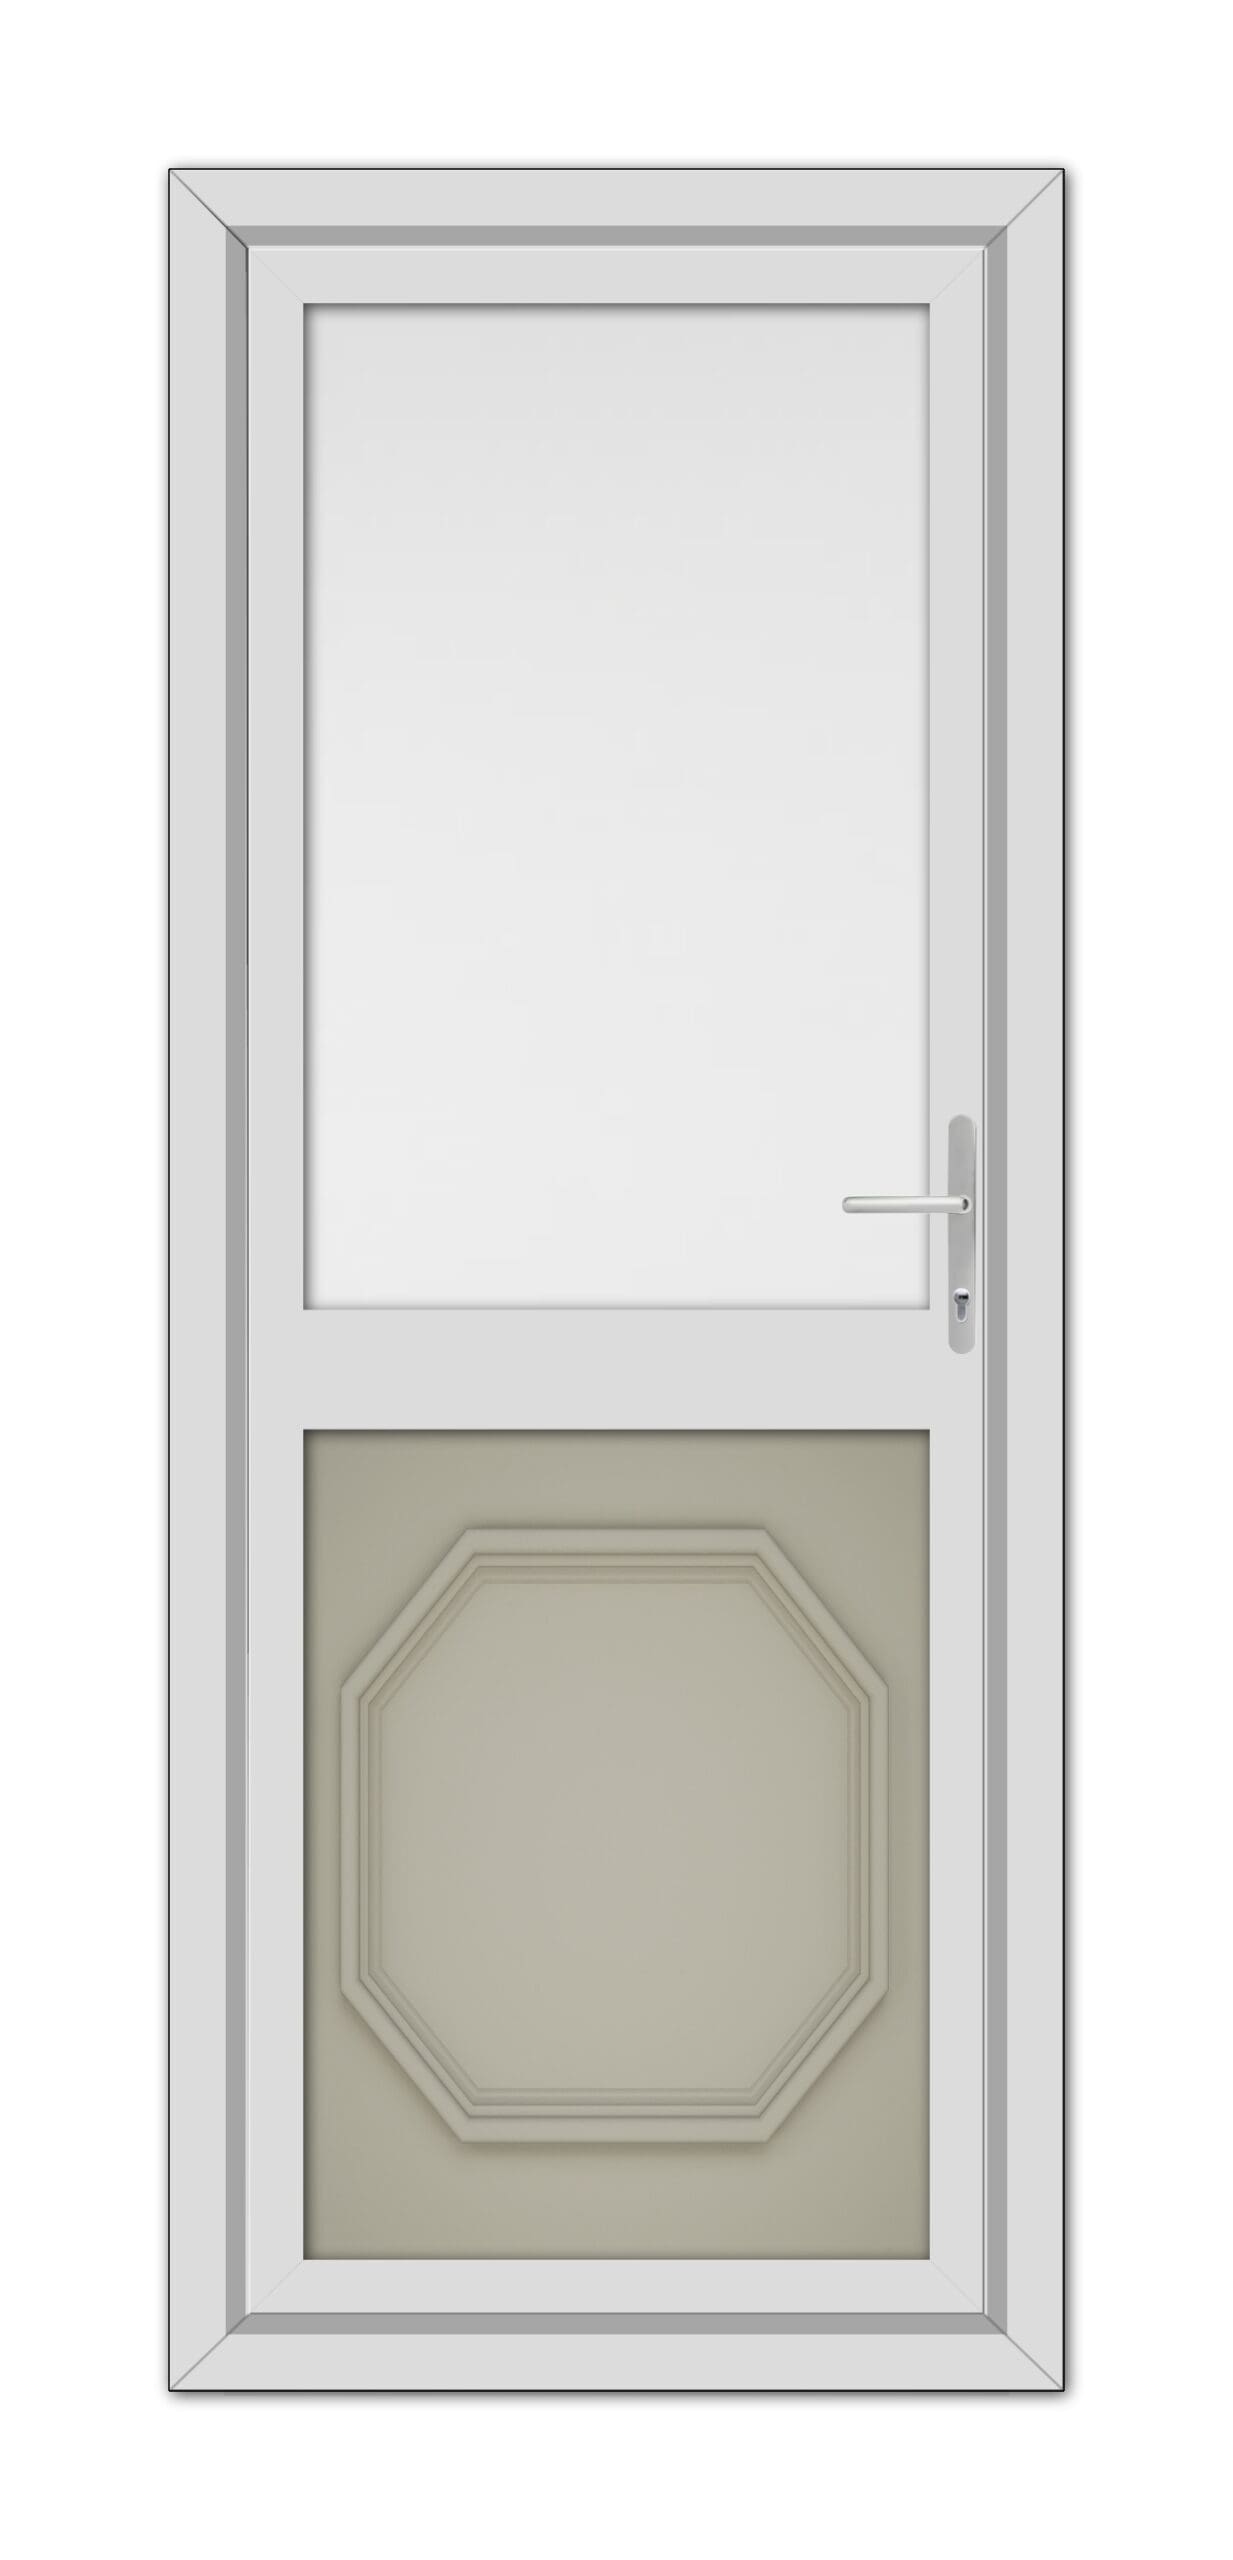 A modern Pebble Grey Buckingham Half uPVC Back Door with a white frame and a geometric panel at the bottom, featuring a small rectangular window at the top.